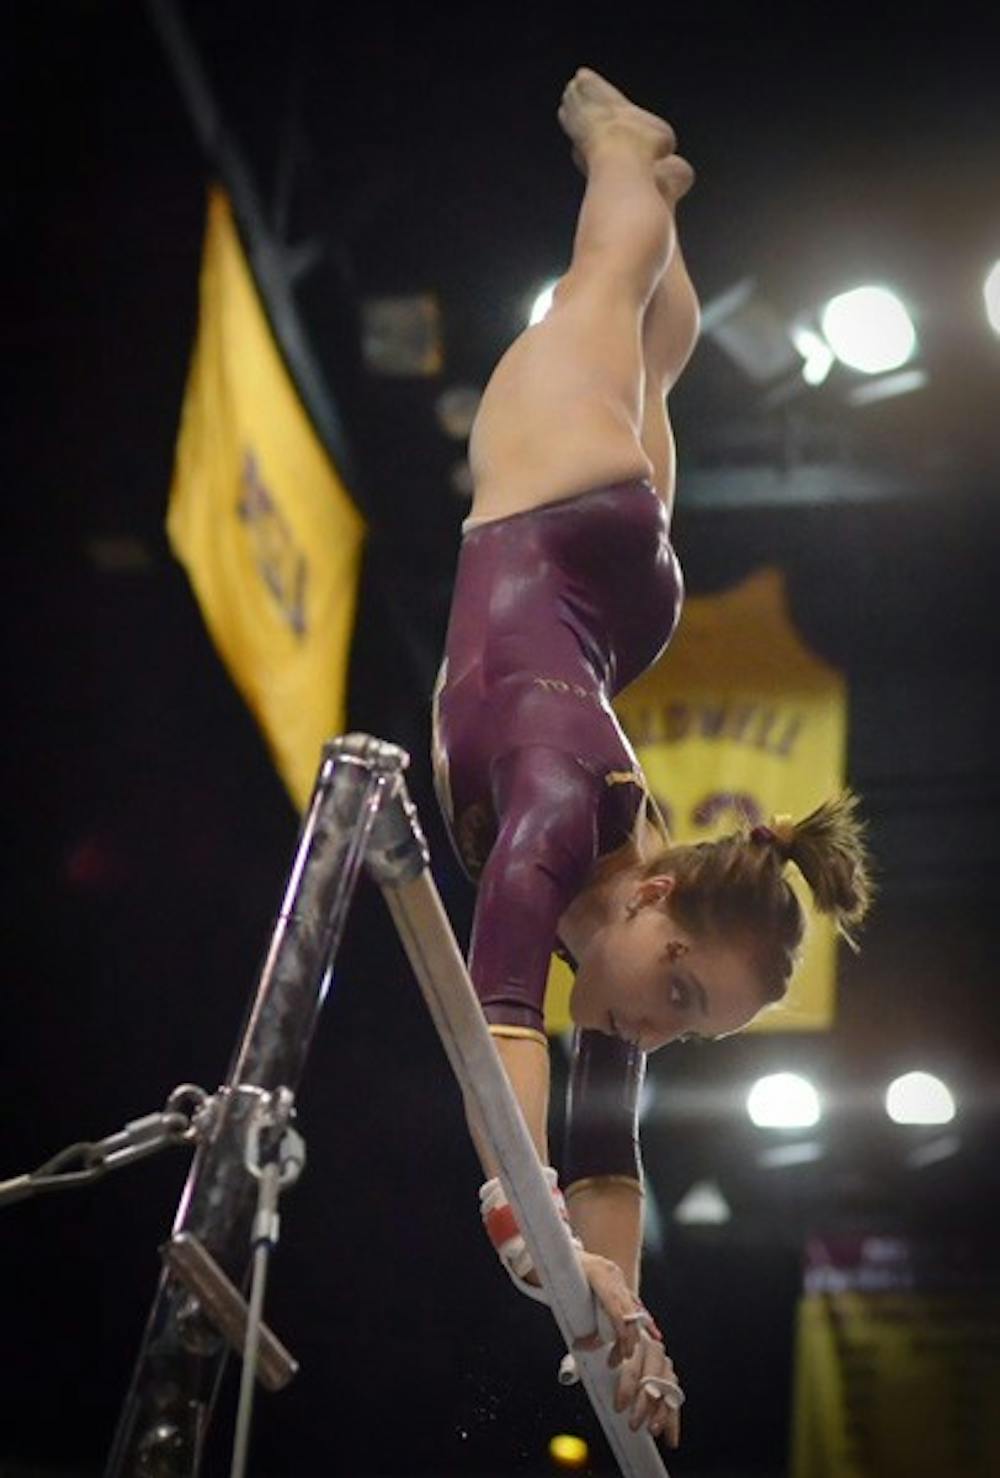 Going Vertical: ASU freshman Samantha Seaman competes on the bars during the Sun Devils’ loss to Oregon State, 196.950 to 194.800, in Tempe on Sunday. Even with the loss, the Sun Devils posted their highest team score of the season. (Photo by Aaron Lavinsky)